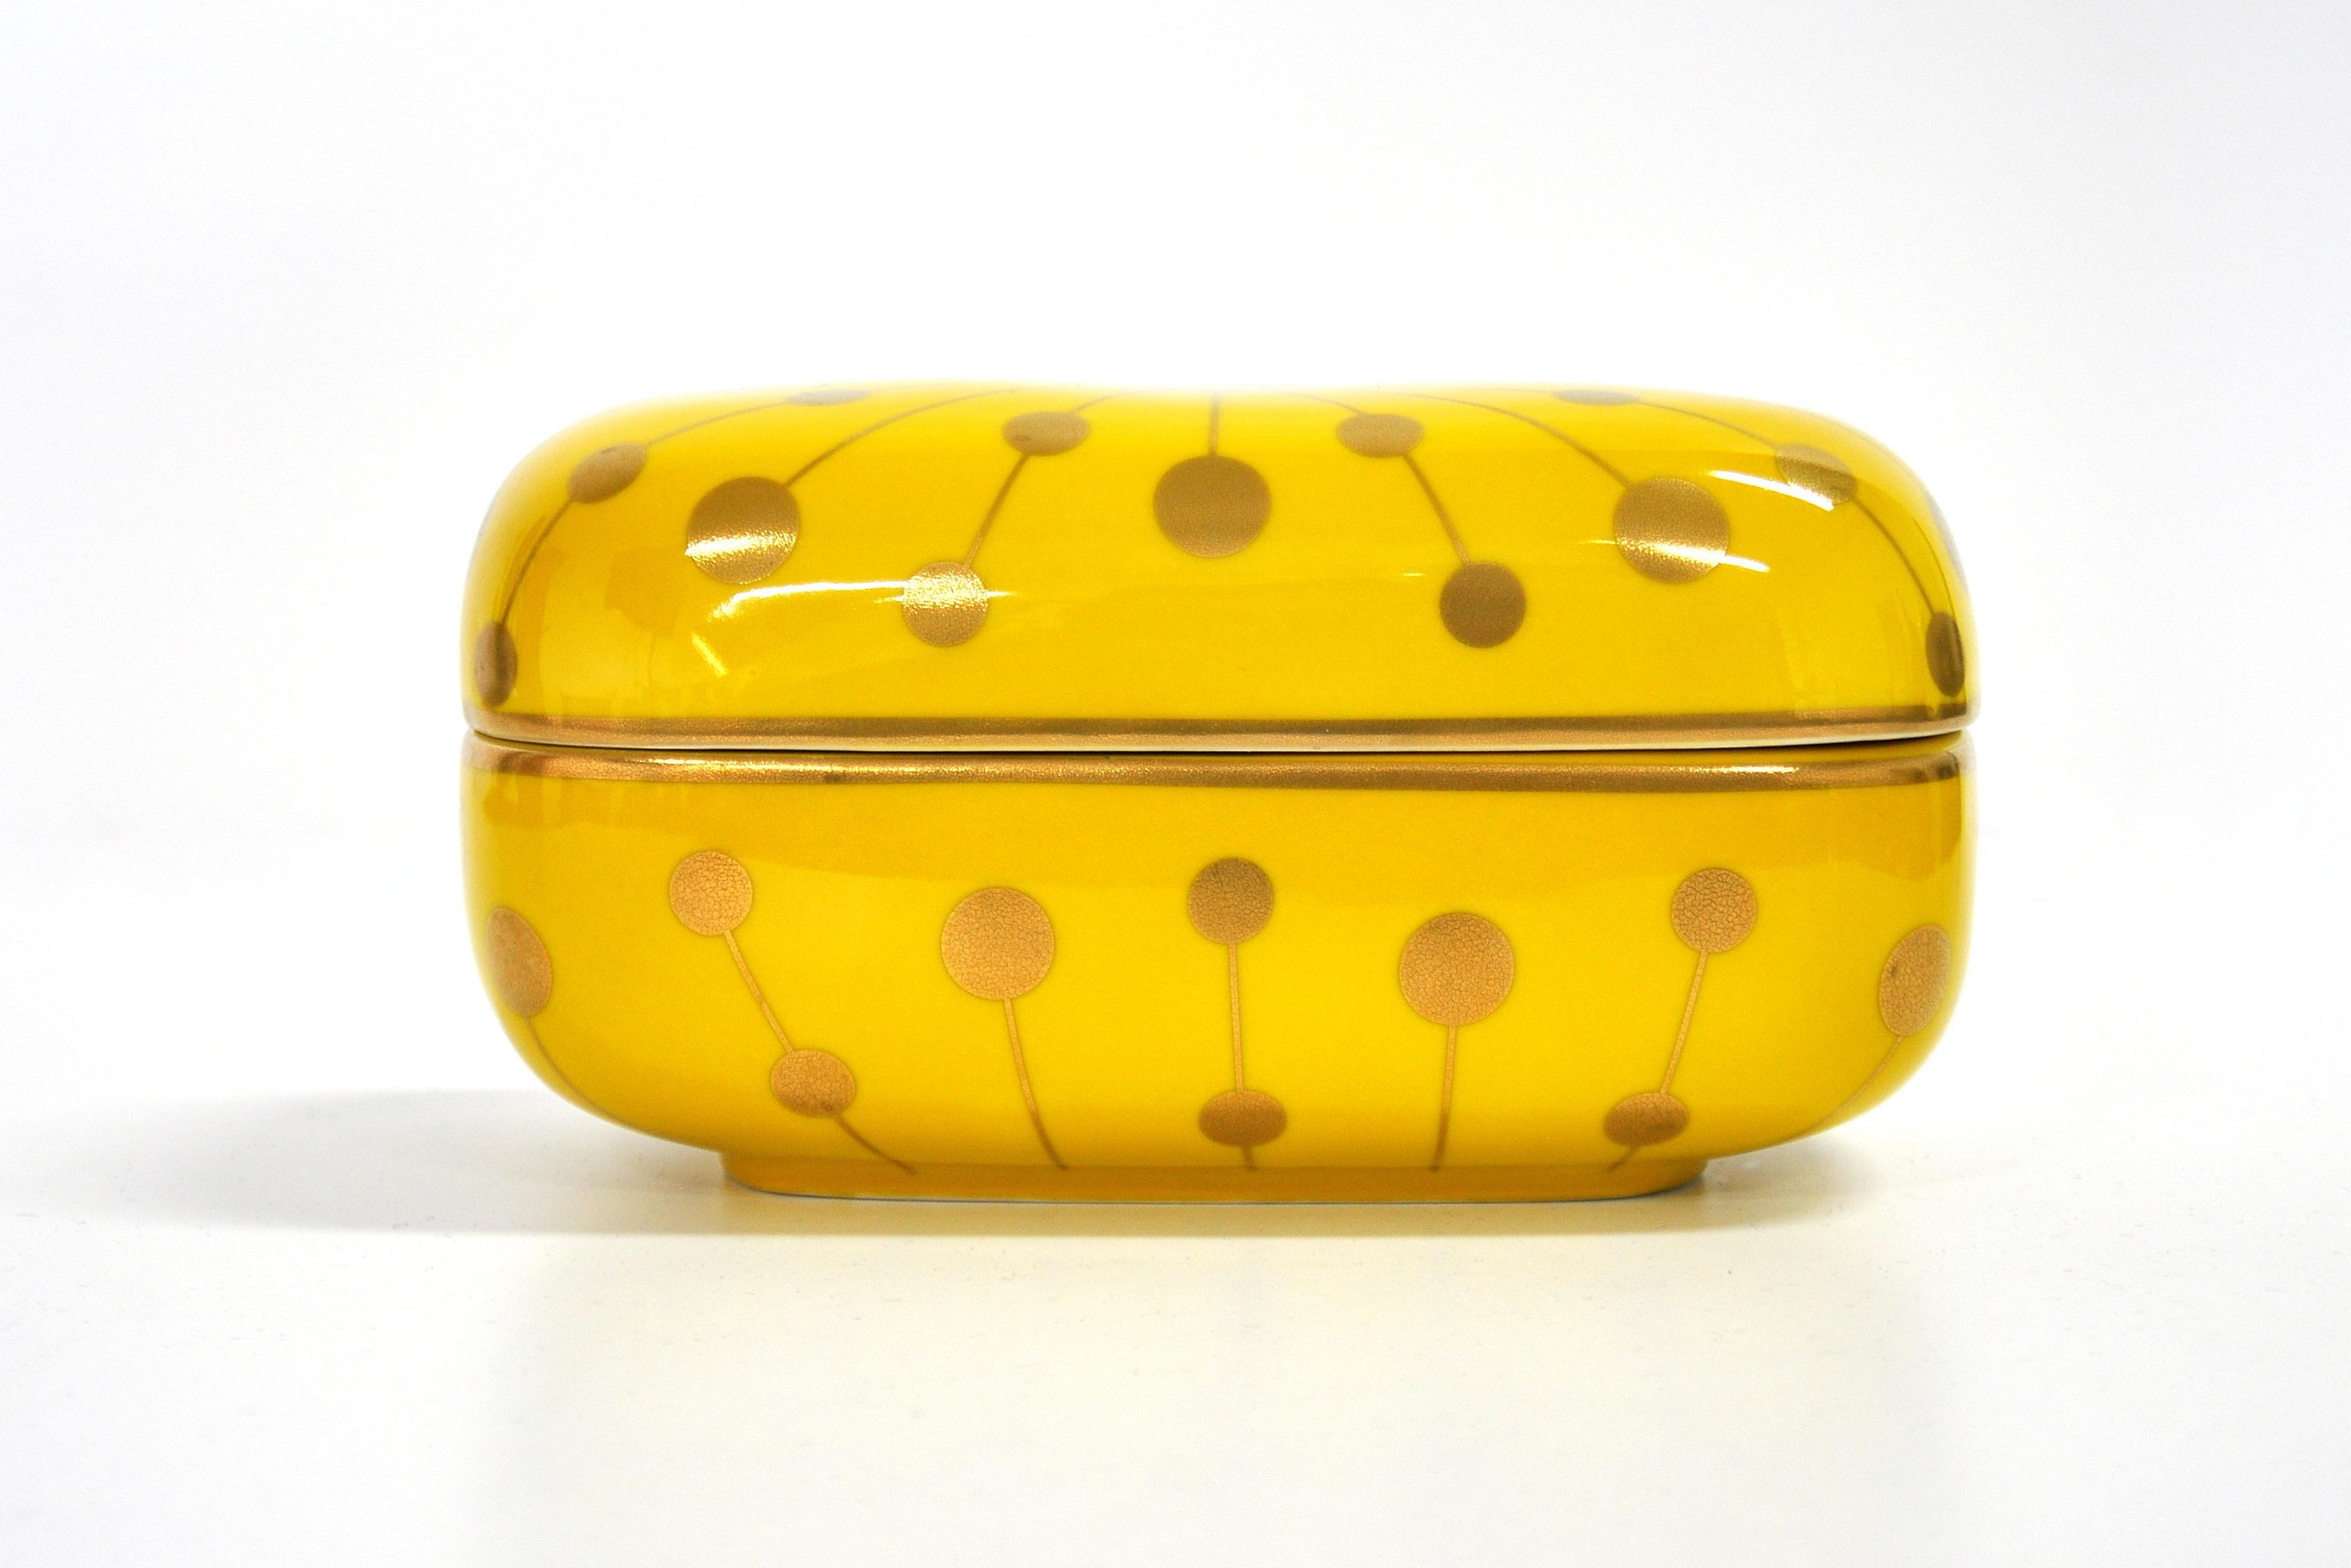 A pill shaped yellow porcelain trinket jewelry box with gold accents and white interior, by Jonathan Adler. Very decorative, makes a great gift!